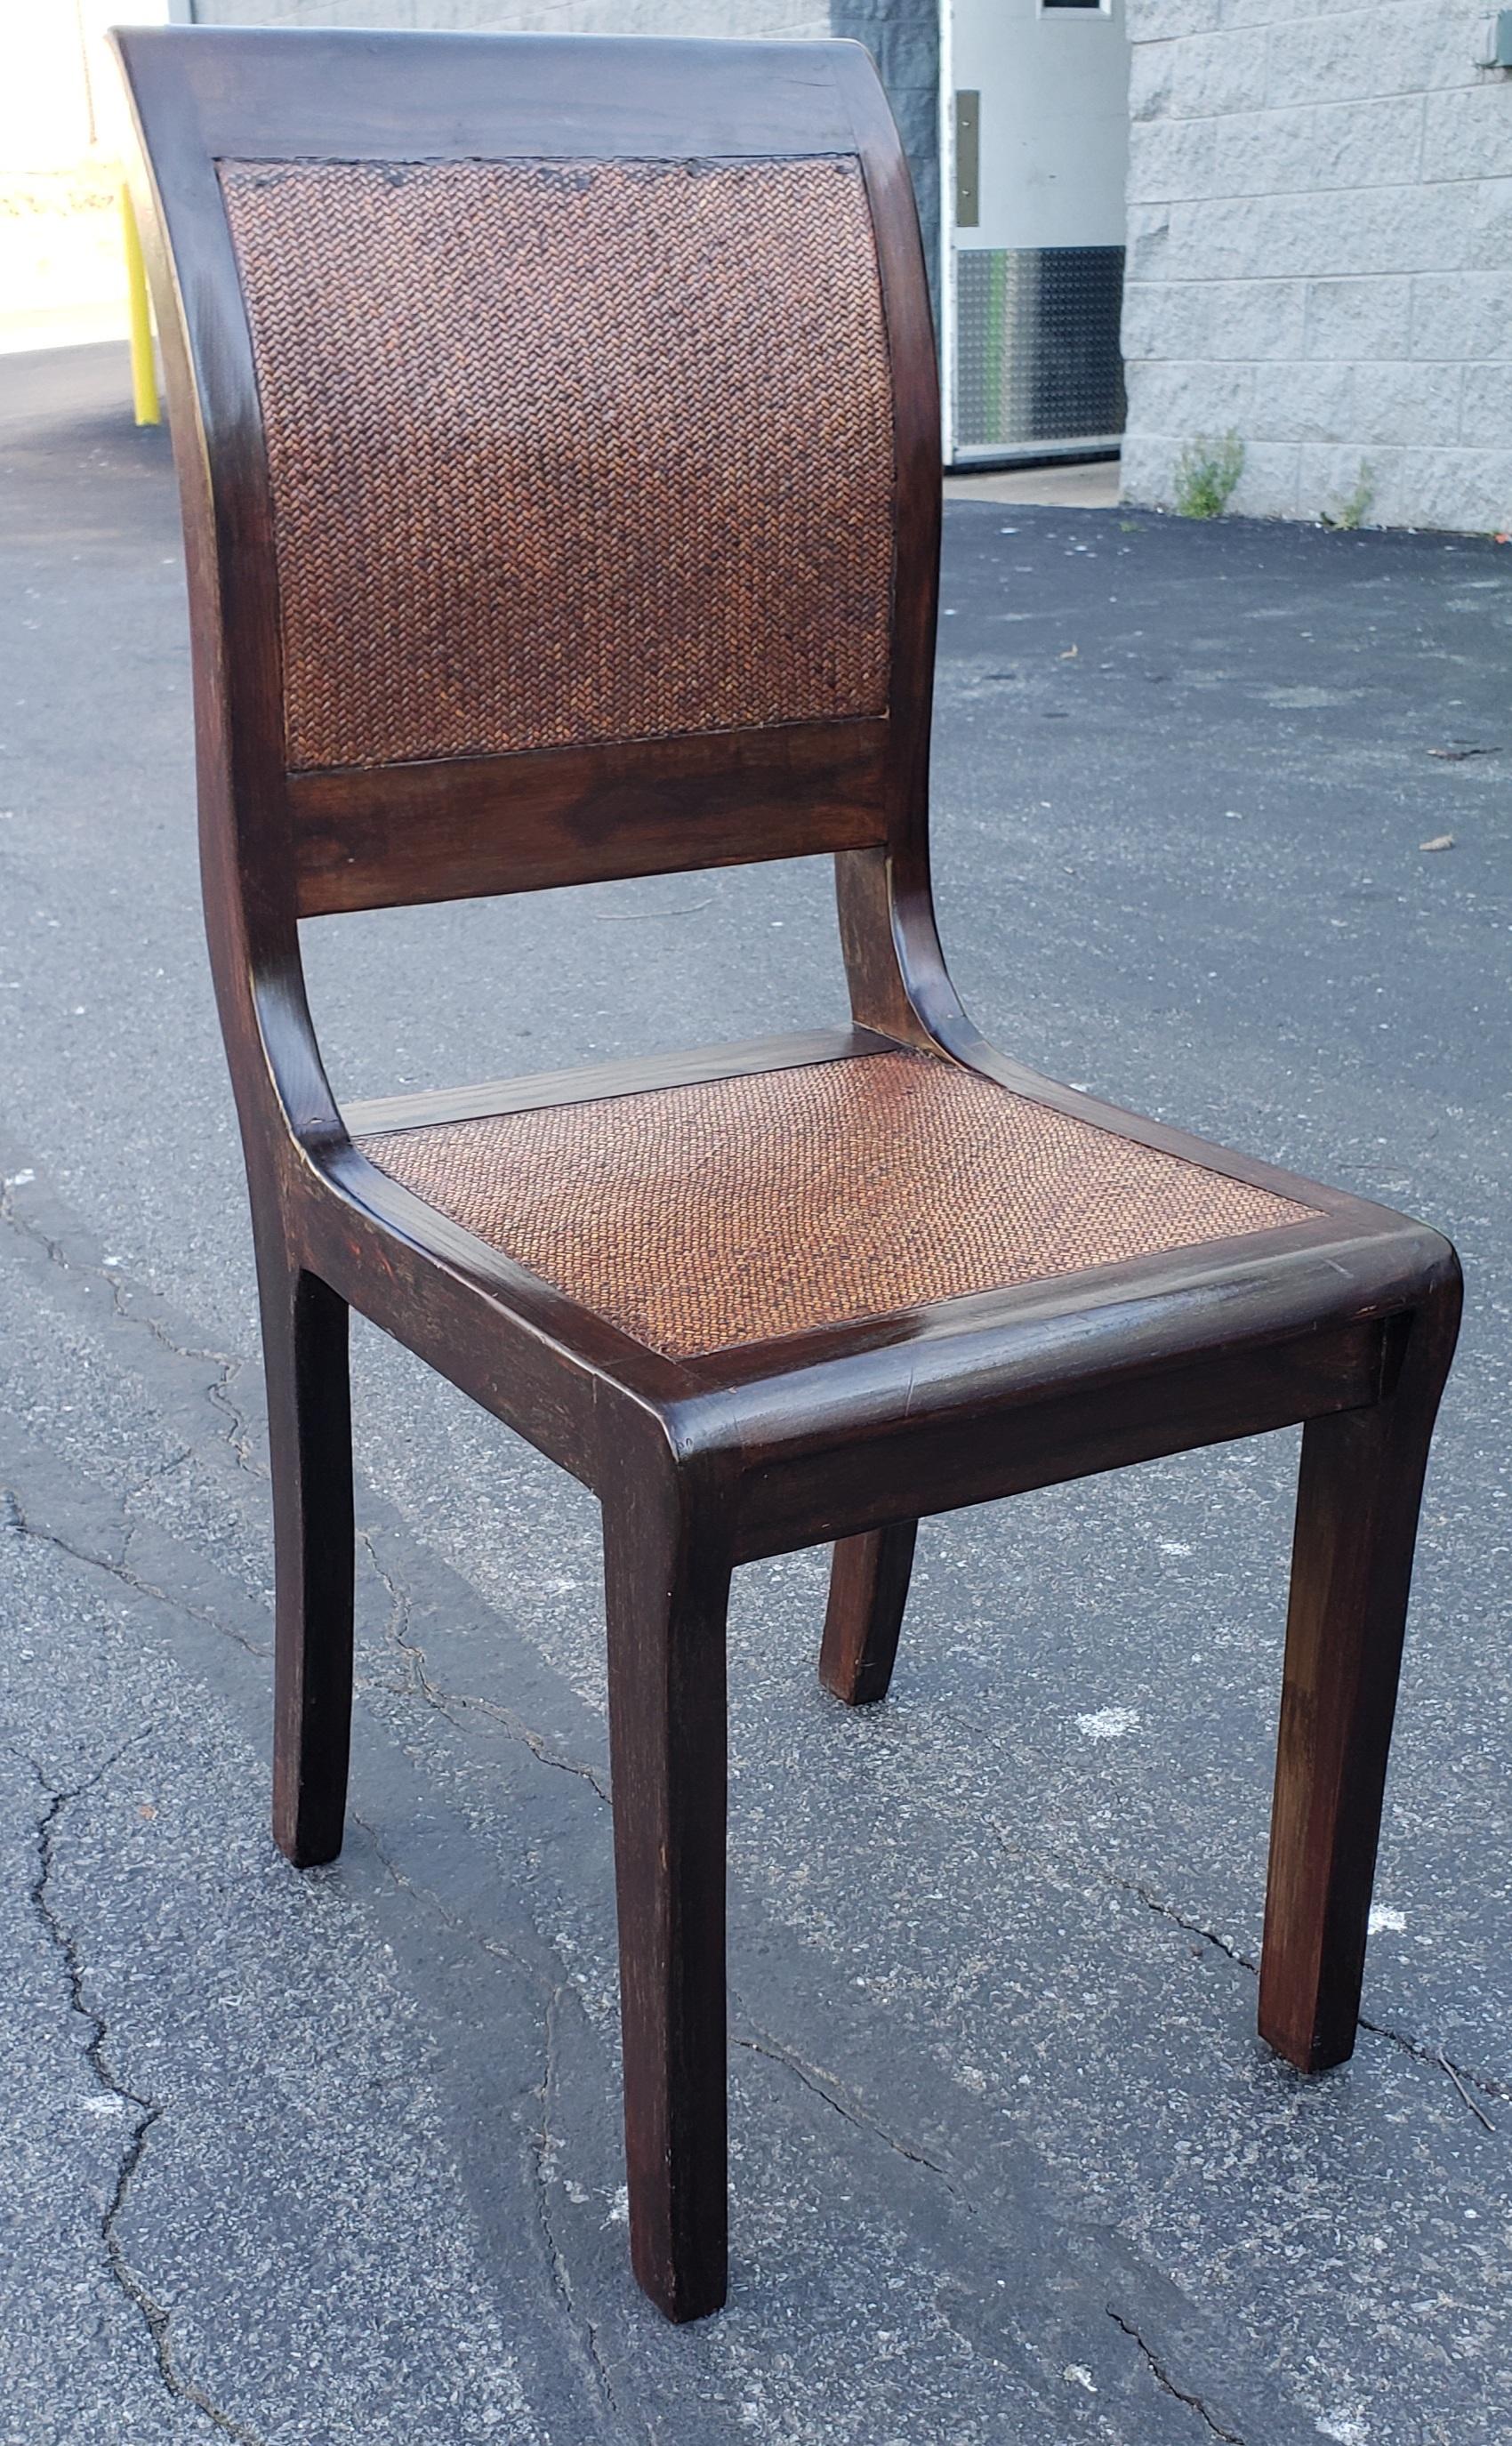 Hand-Crafted Pair of 1950s Rosewood and Braided Wicker over Hardwood Seat and Back Chairs For Sale